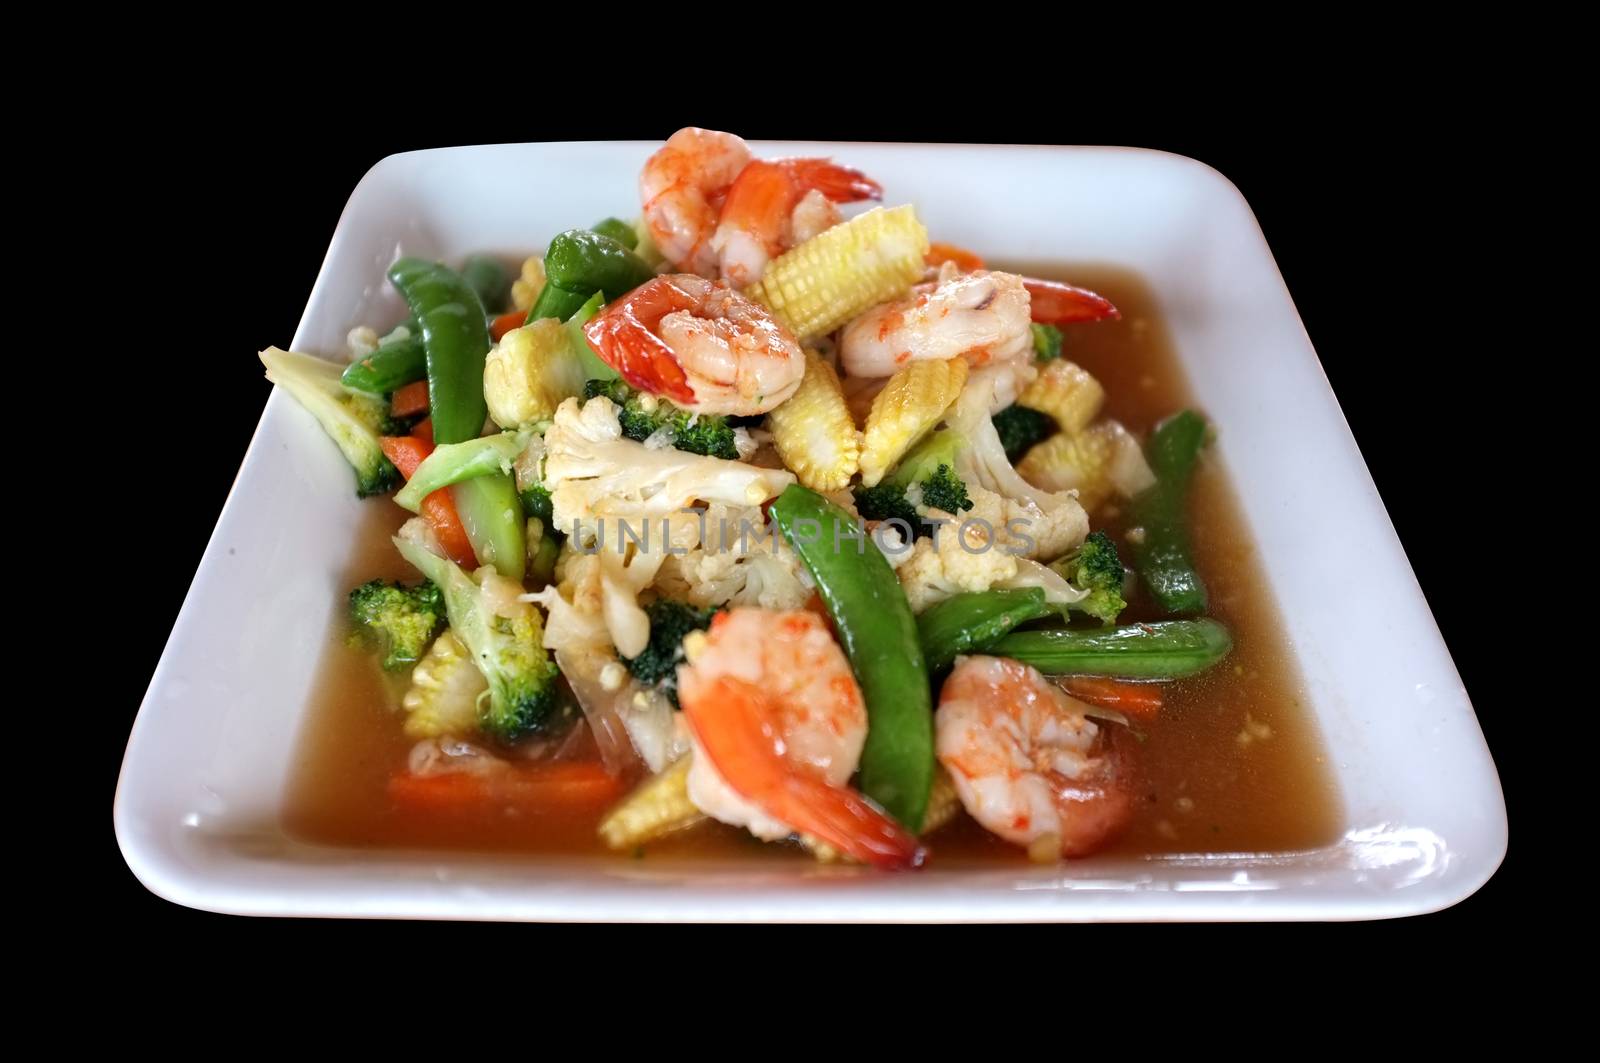 Stir fry mixed vegetables and shrimp in white dish by Hepjam